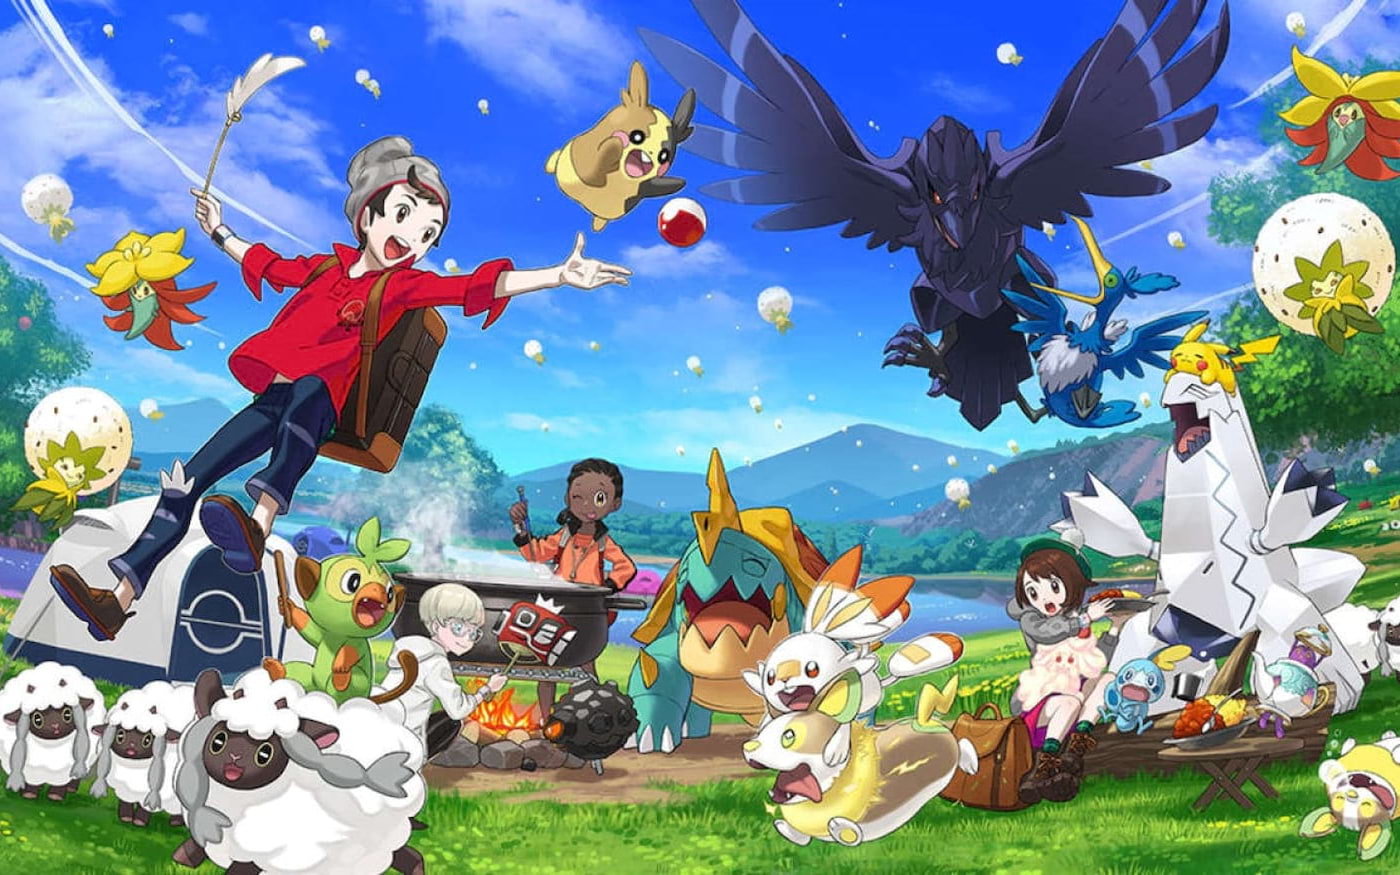 Pokémon Sword and Shield sells 16 million copies in 46 days